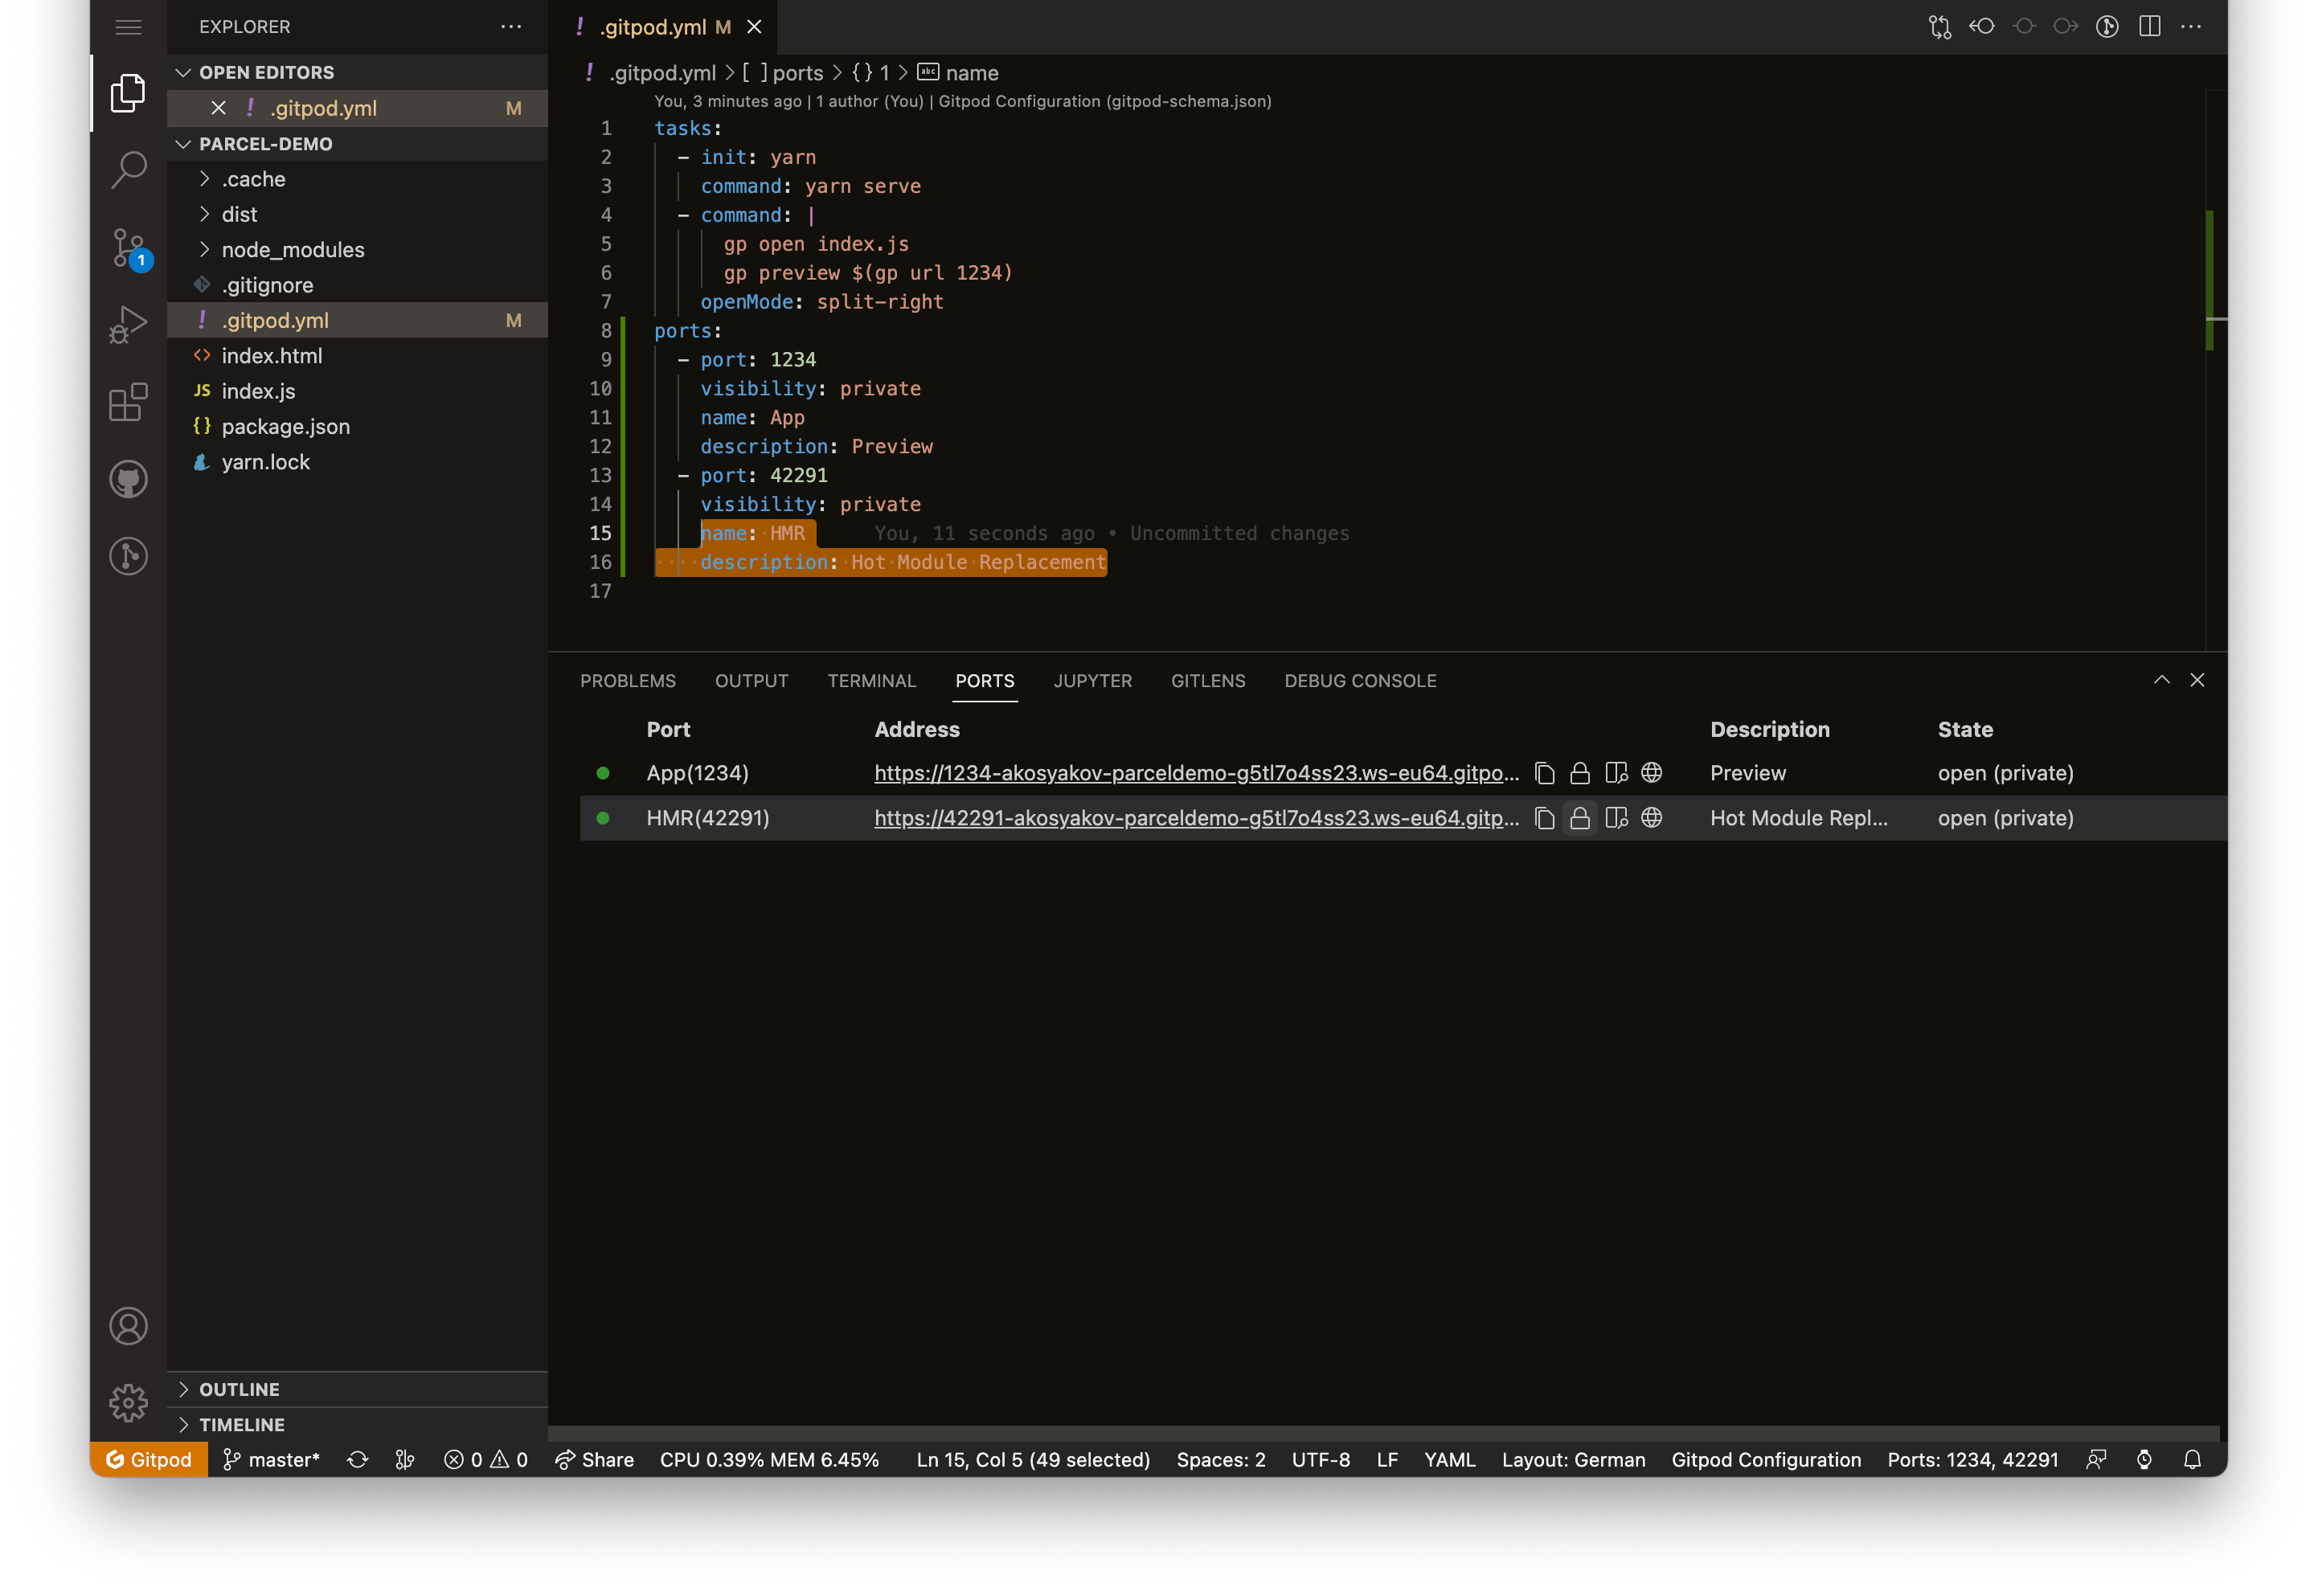 The new VS Code Browser ports view, shown at the bottom of VS Code alongside the terminals and output tabs